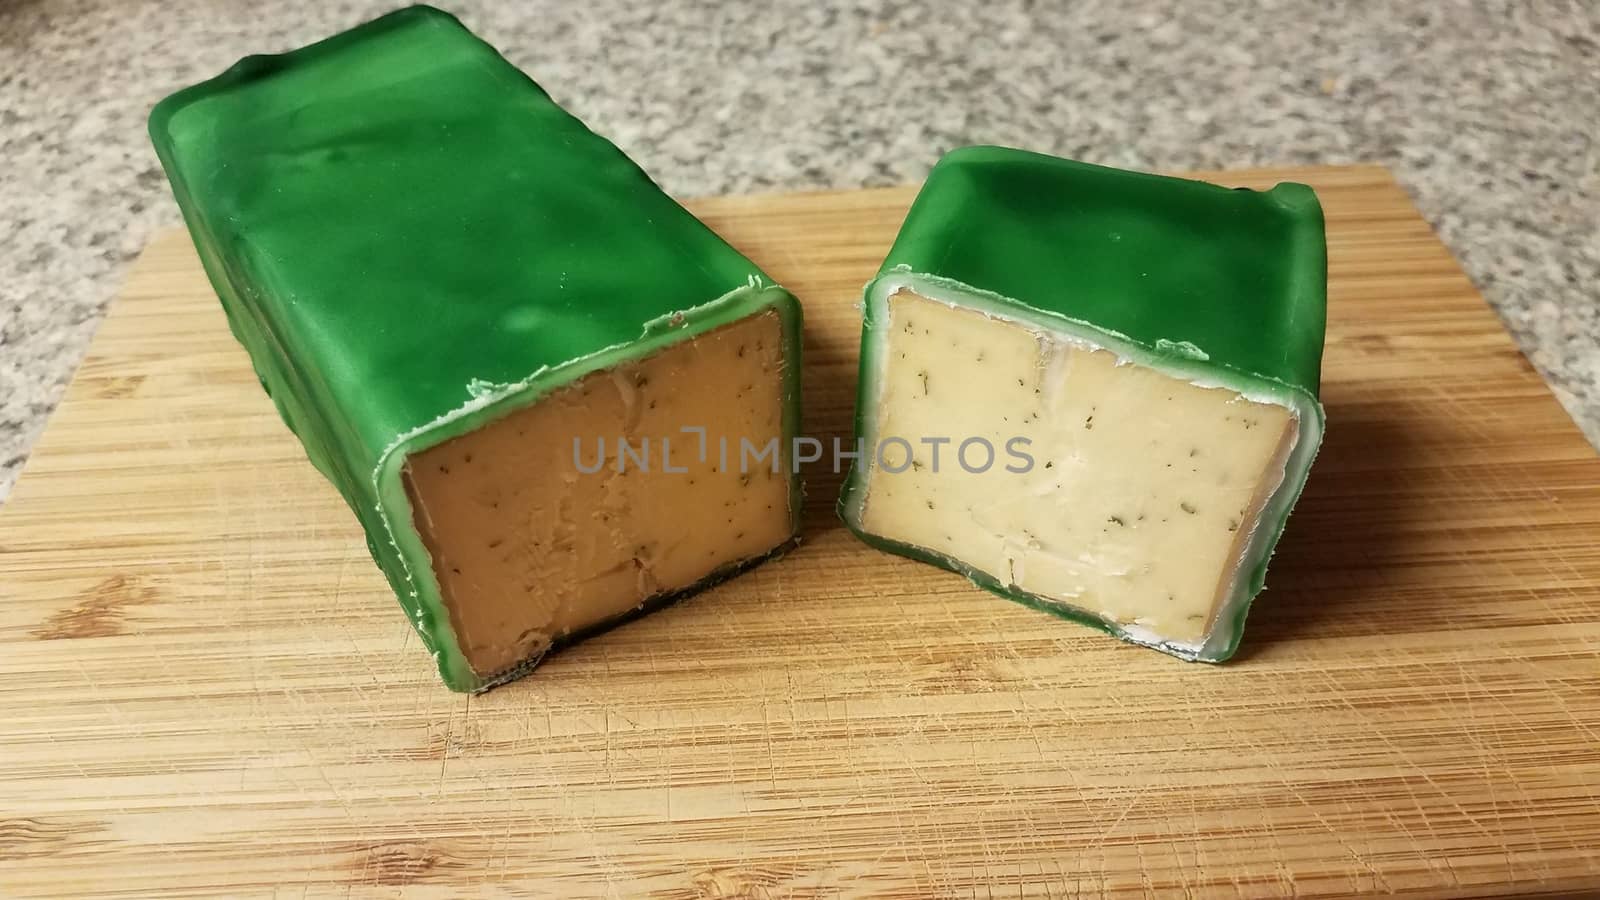 cut cheese encased or sealed in green wax on wood cutting board